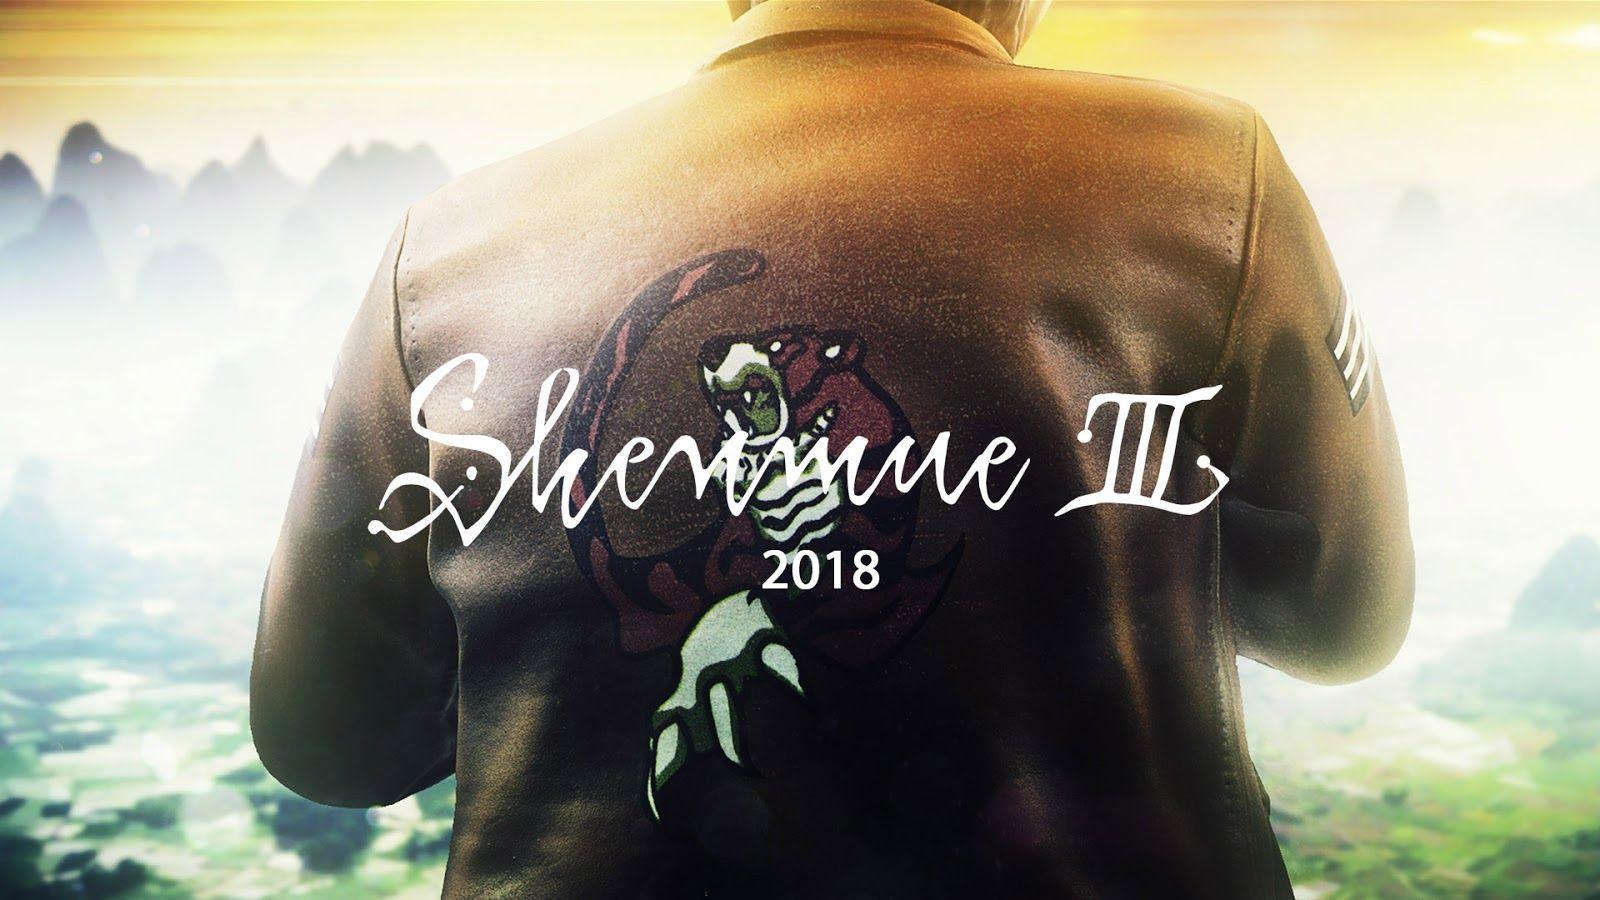 Shenmue III HD Wallpaper games review, play online games